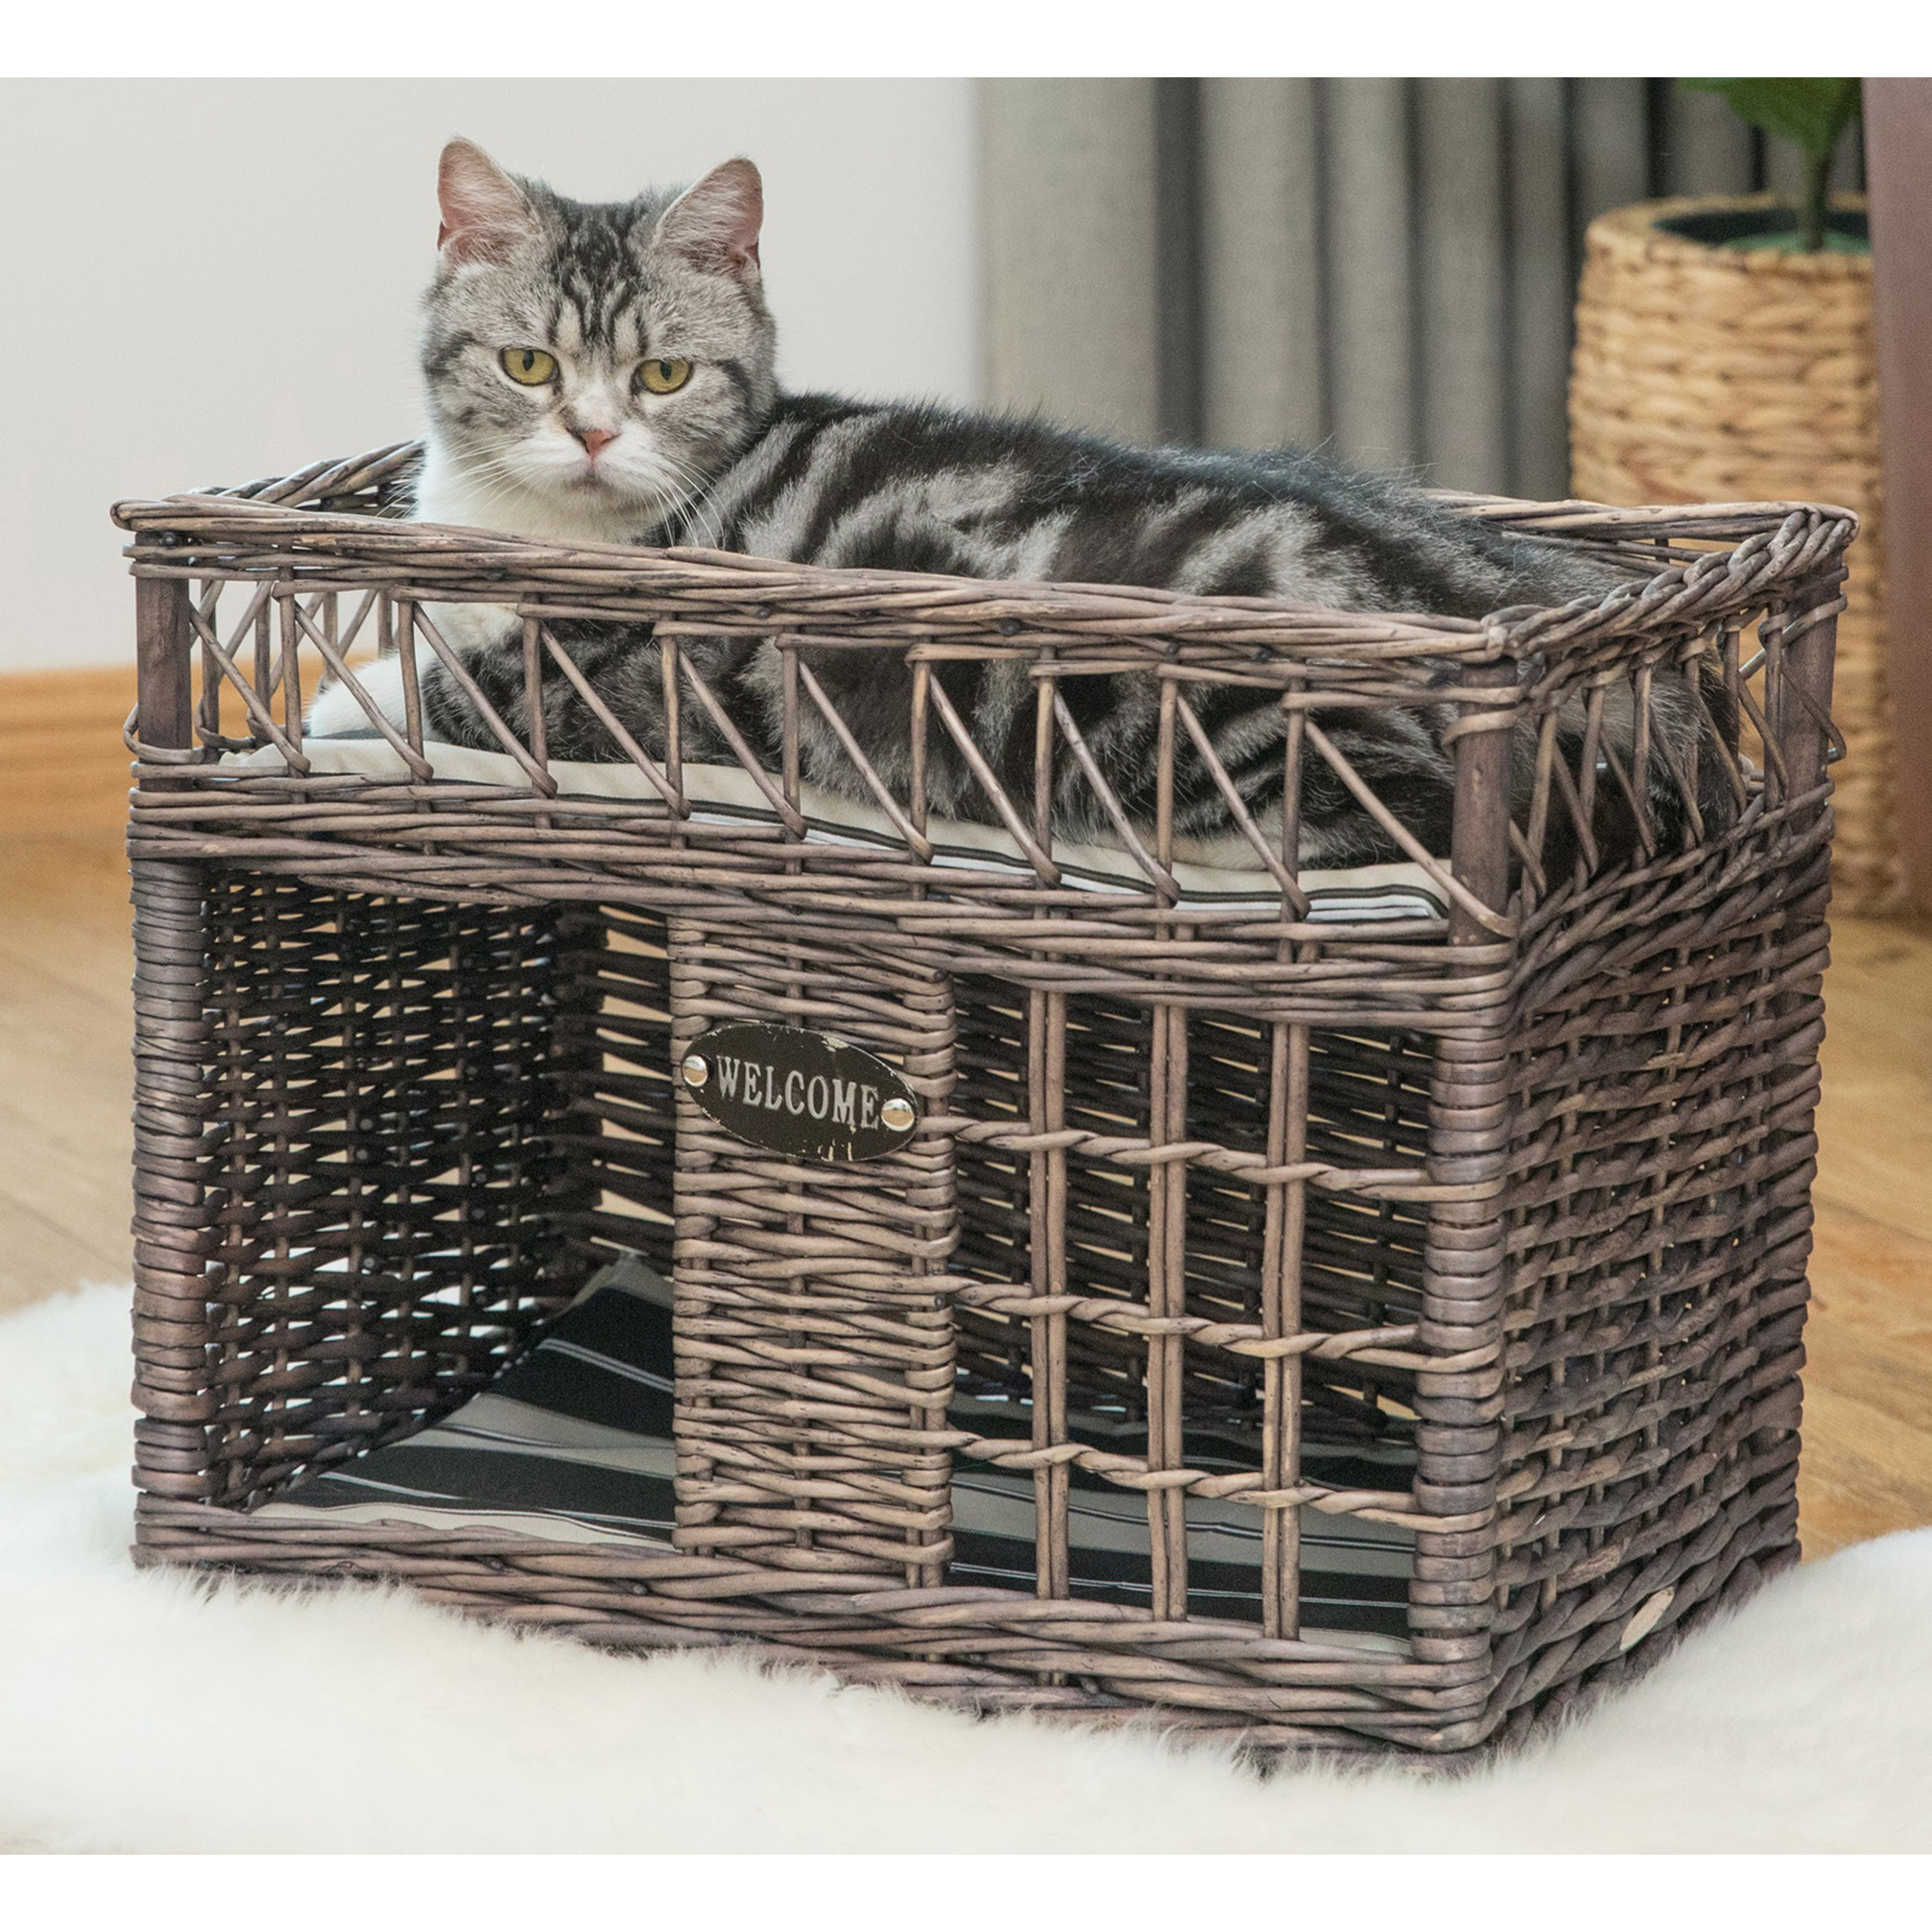 Two-level Willow Pet House With Soft Fabric Cushion For Cat Or Dog, Grey